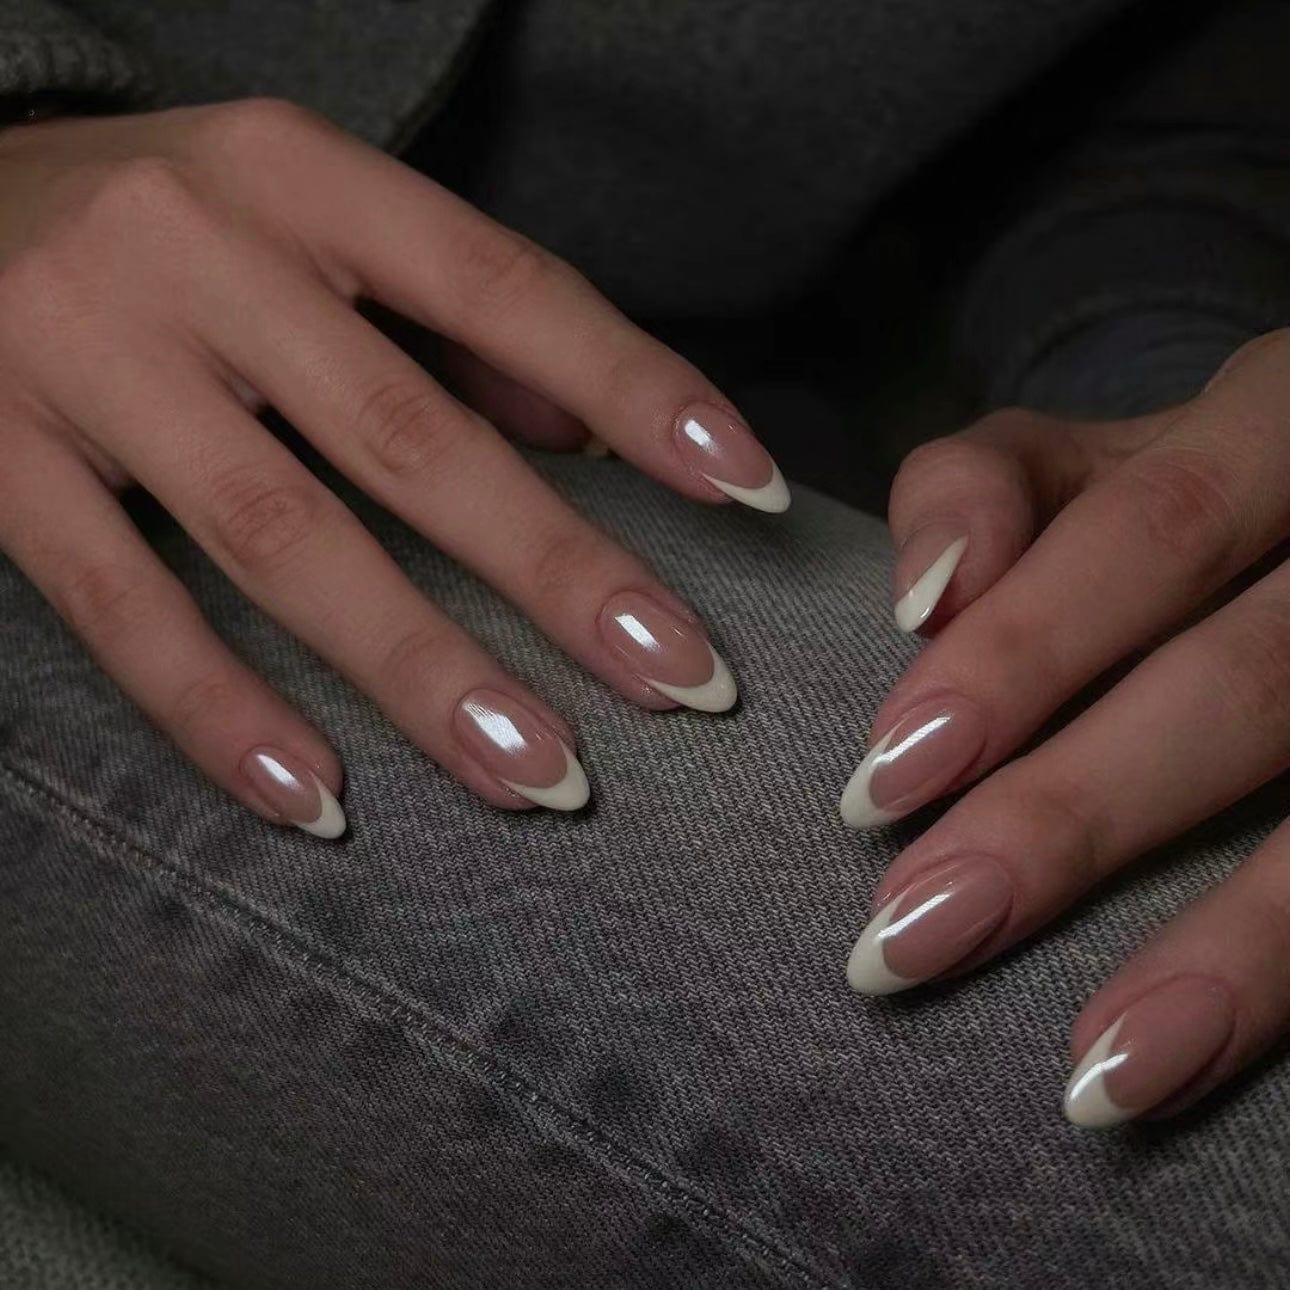 Short round nails inspired by Hailey Bieber nails design, featuring trendy and versatile designs